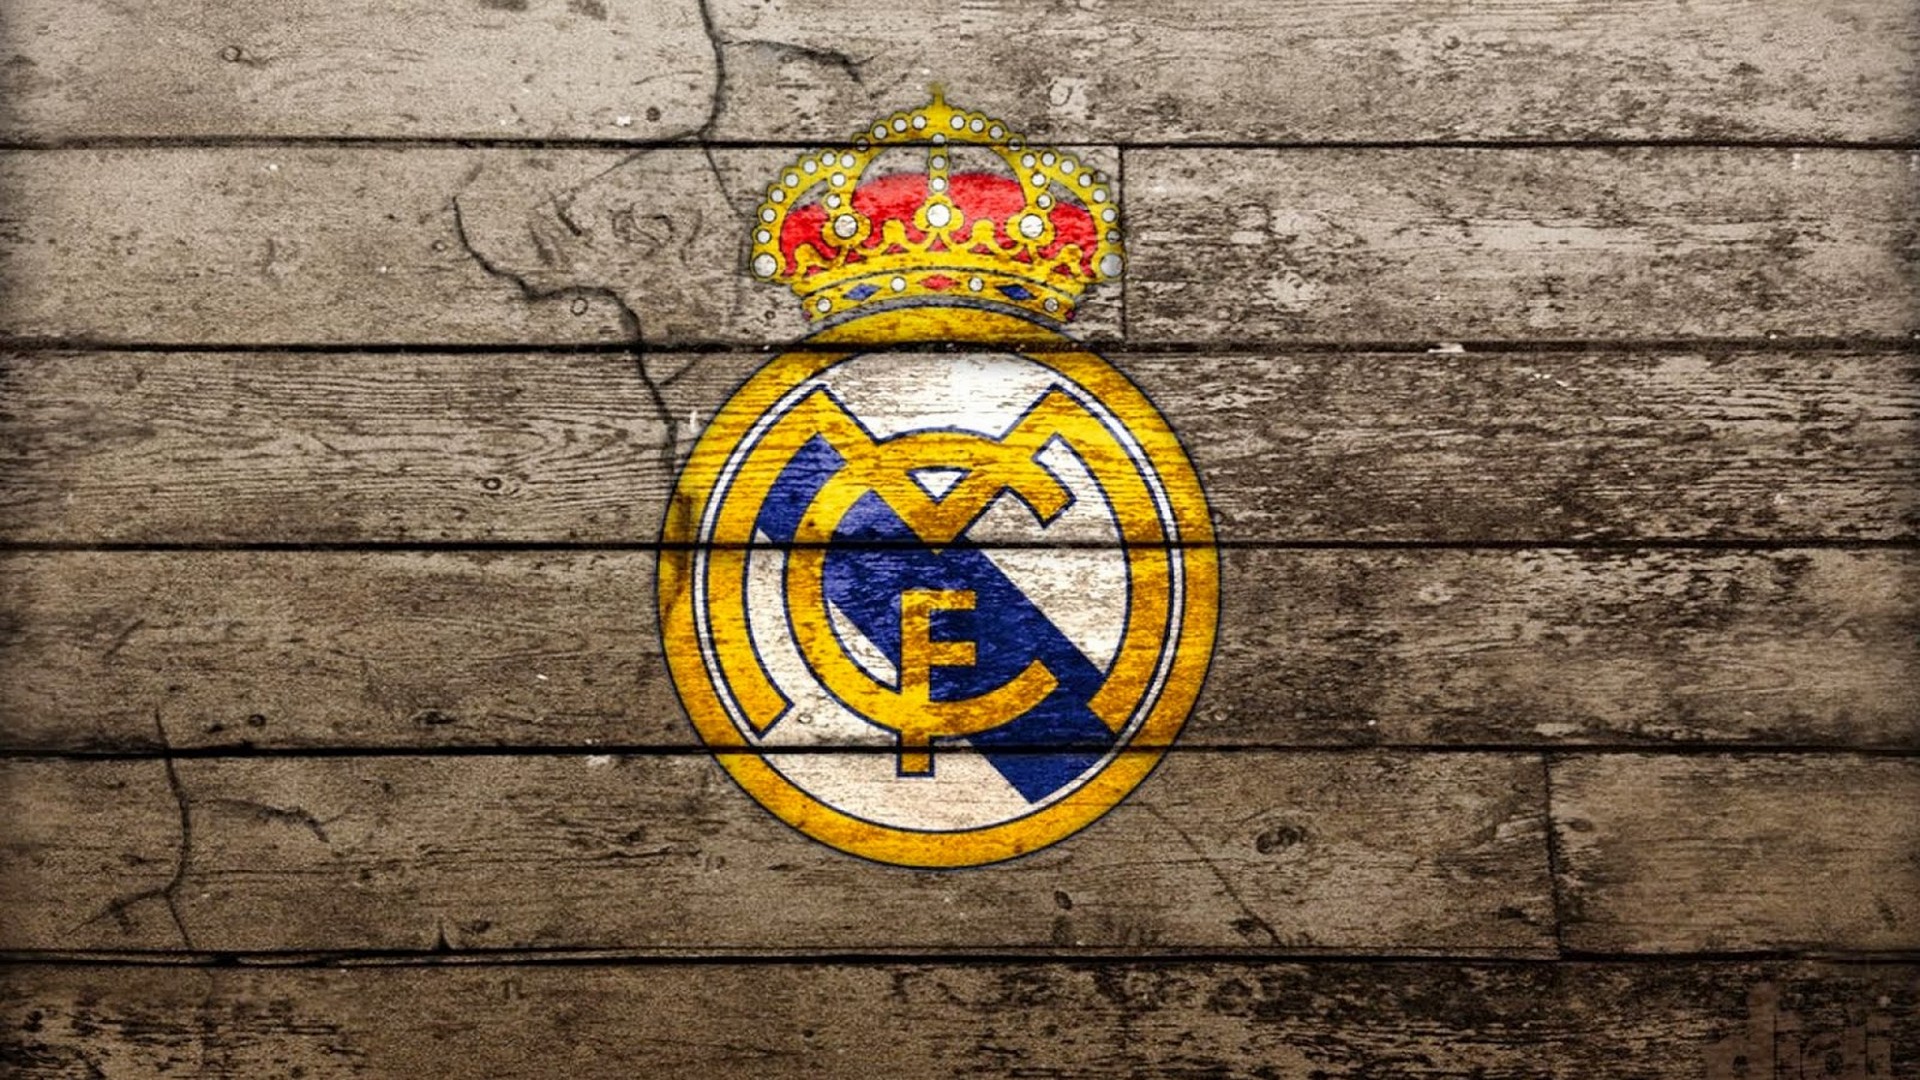 Wallpapers Real Madrid CF with resolution 1920x1080 pixel. You can make this wallpaper for your Mac or Windows Desktop Background, iPhone, Android or Tablet and another Smartphone device